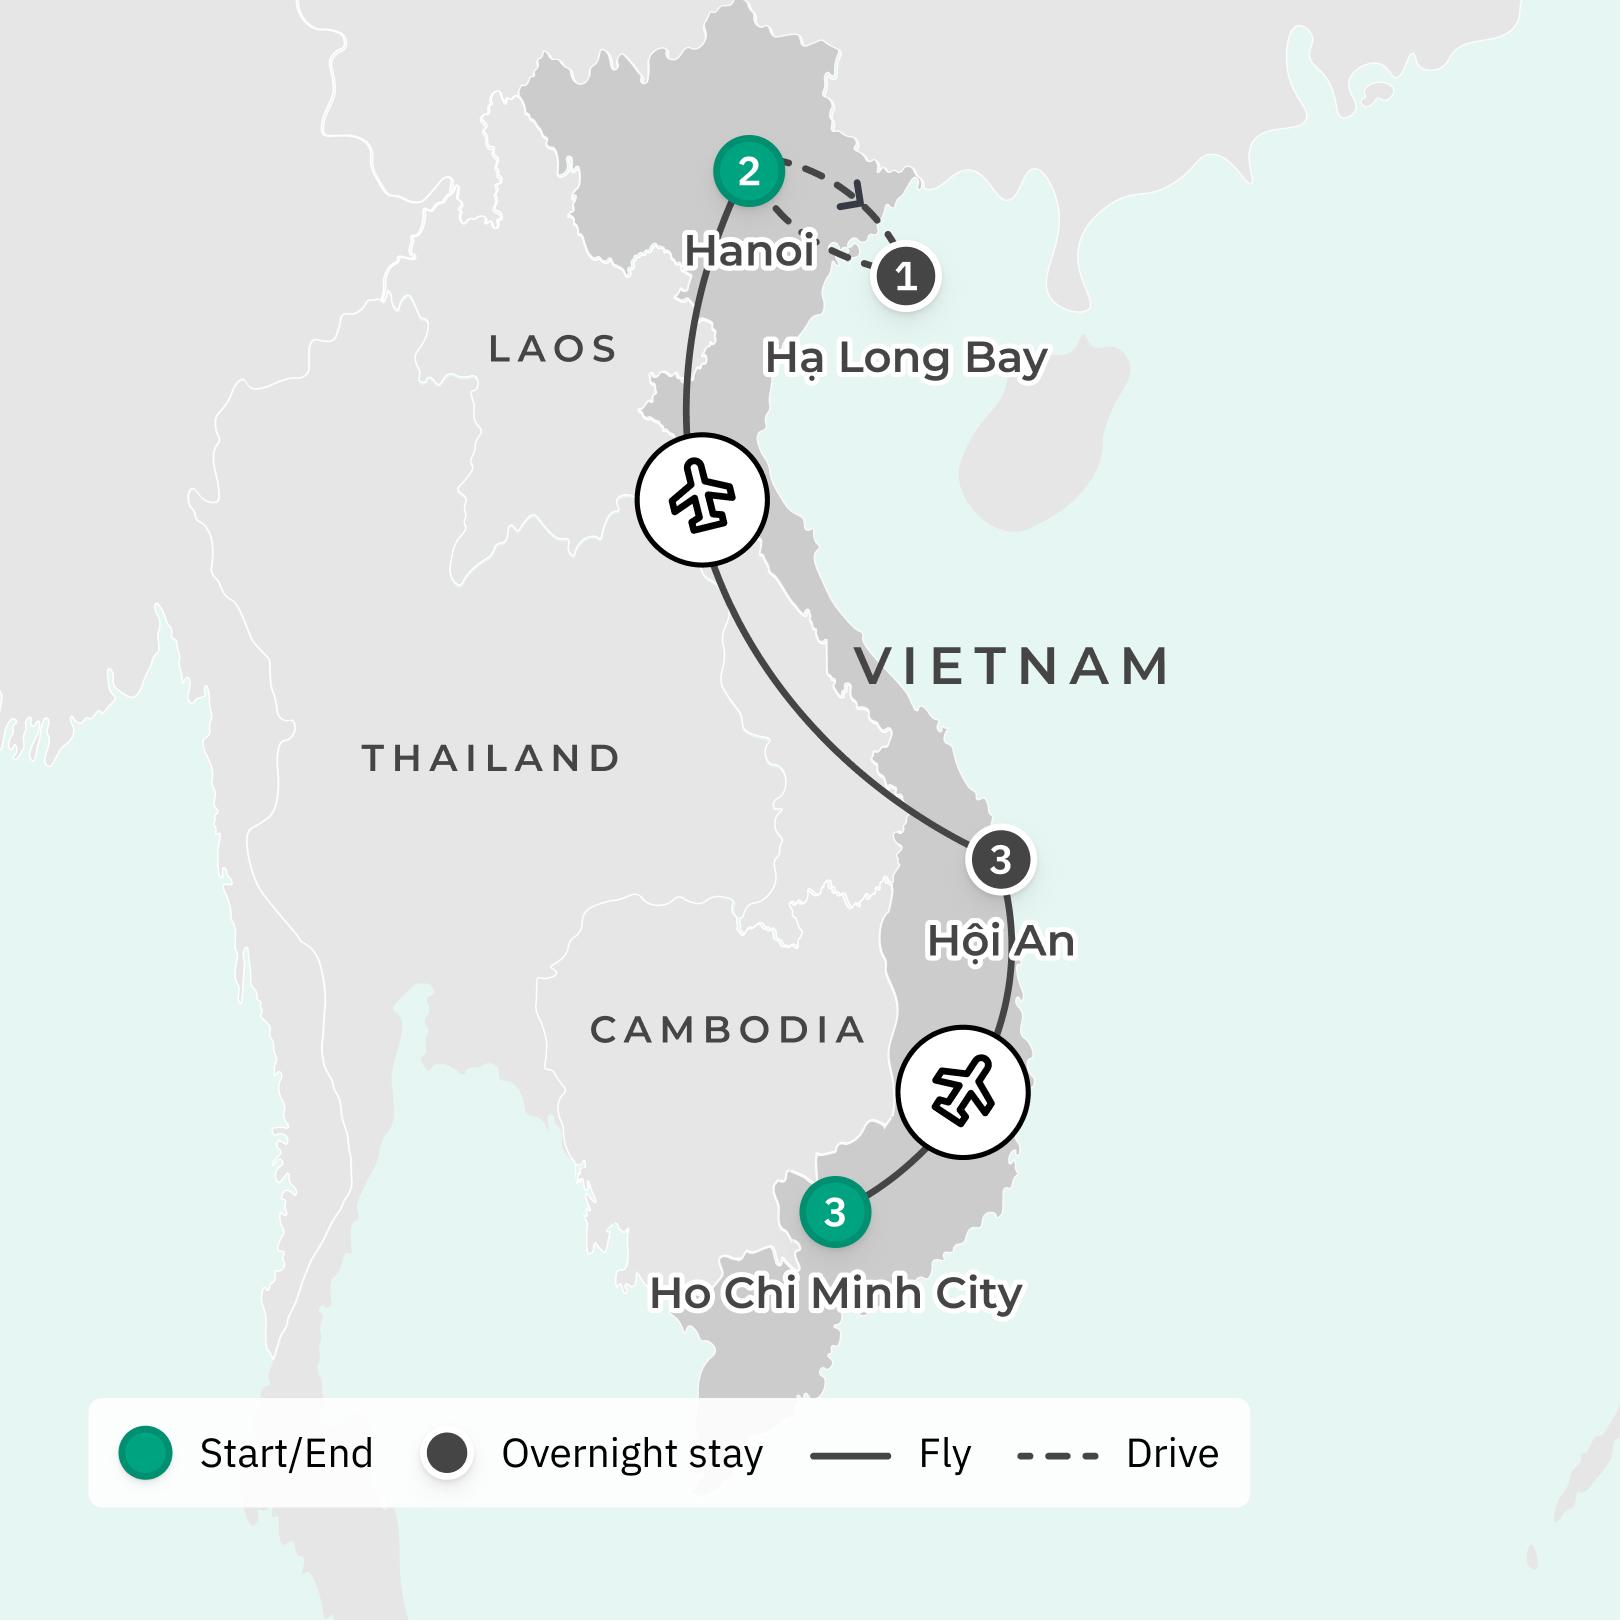 Vietnam Highlights Tour with Five-Star Accommodation, Ha Long Bay Cruise, Hoi An Old Town Visit & Mekong Delta Sampan Tour route map